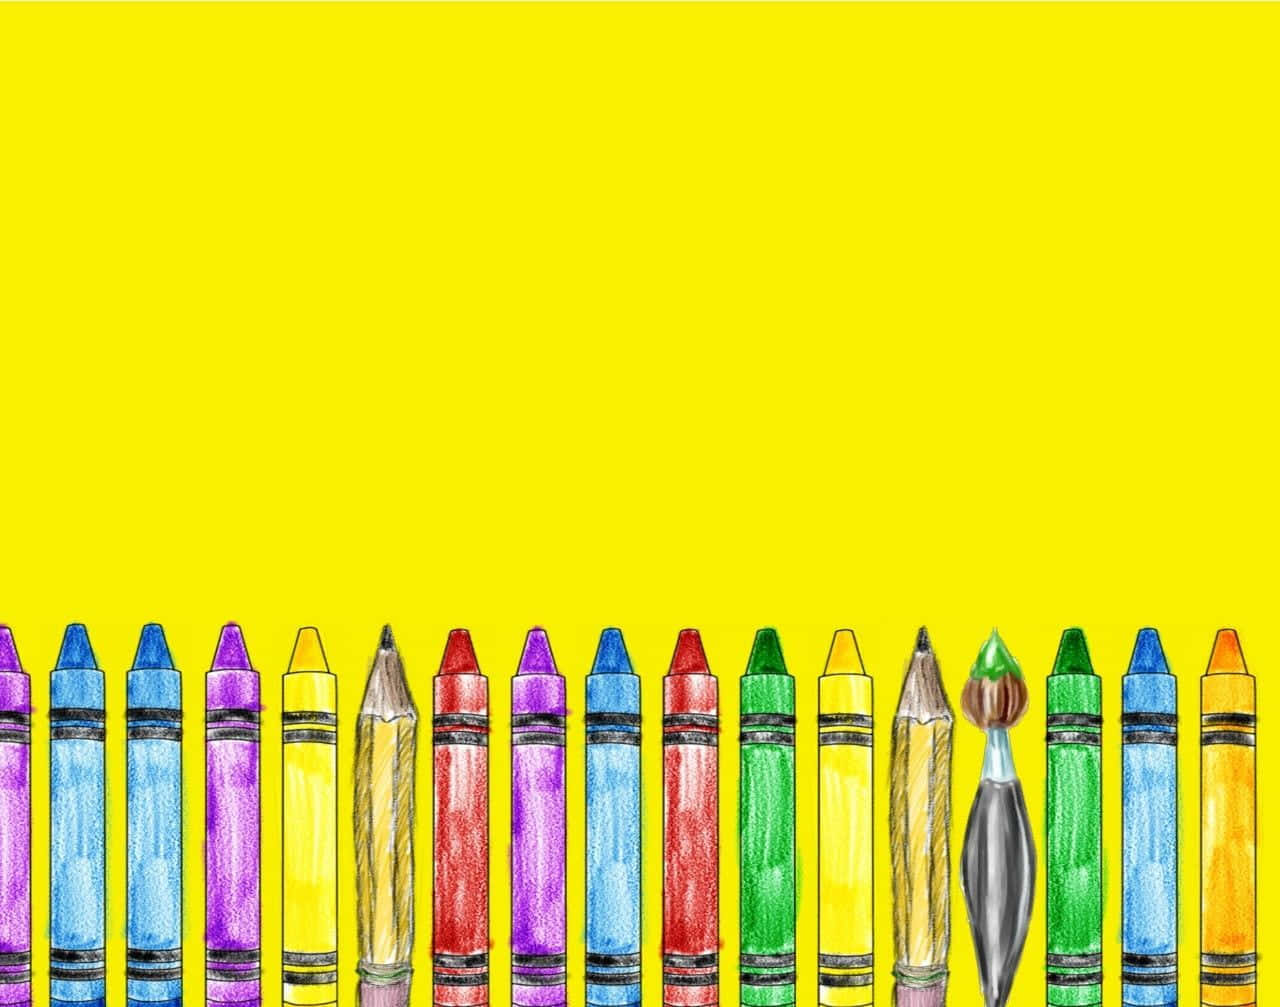 Crayons In A Row On A Yellow Background